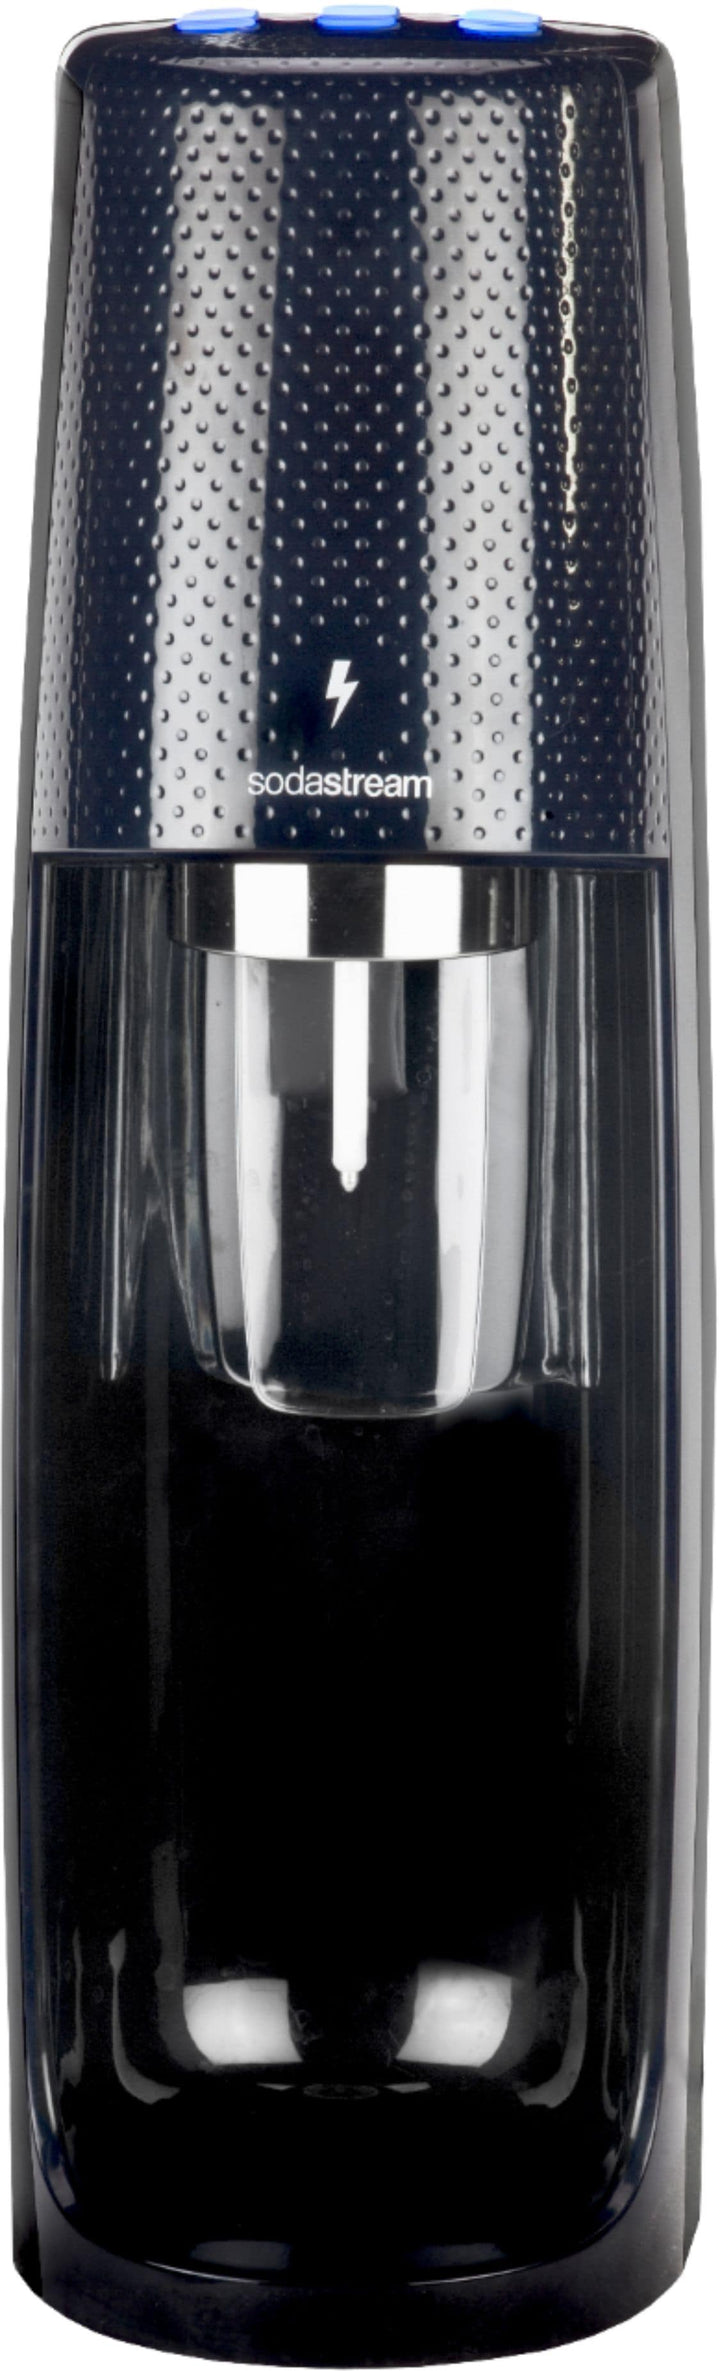 SodaStream - Fizzi One Touch Sparkling Water Maker Kit - Black_5